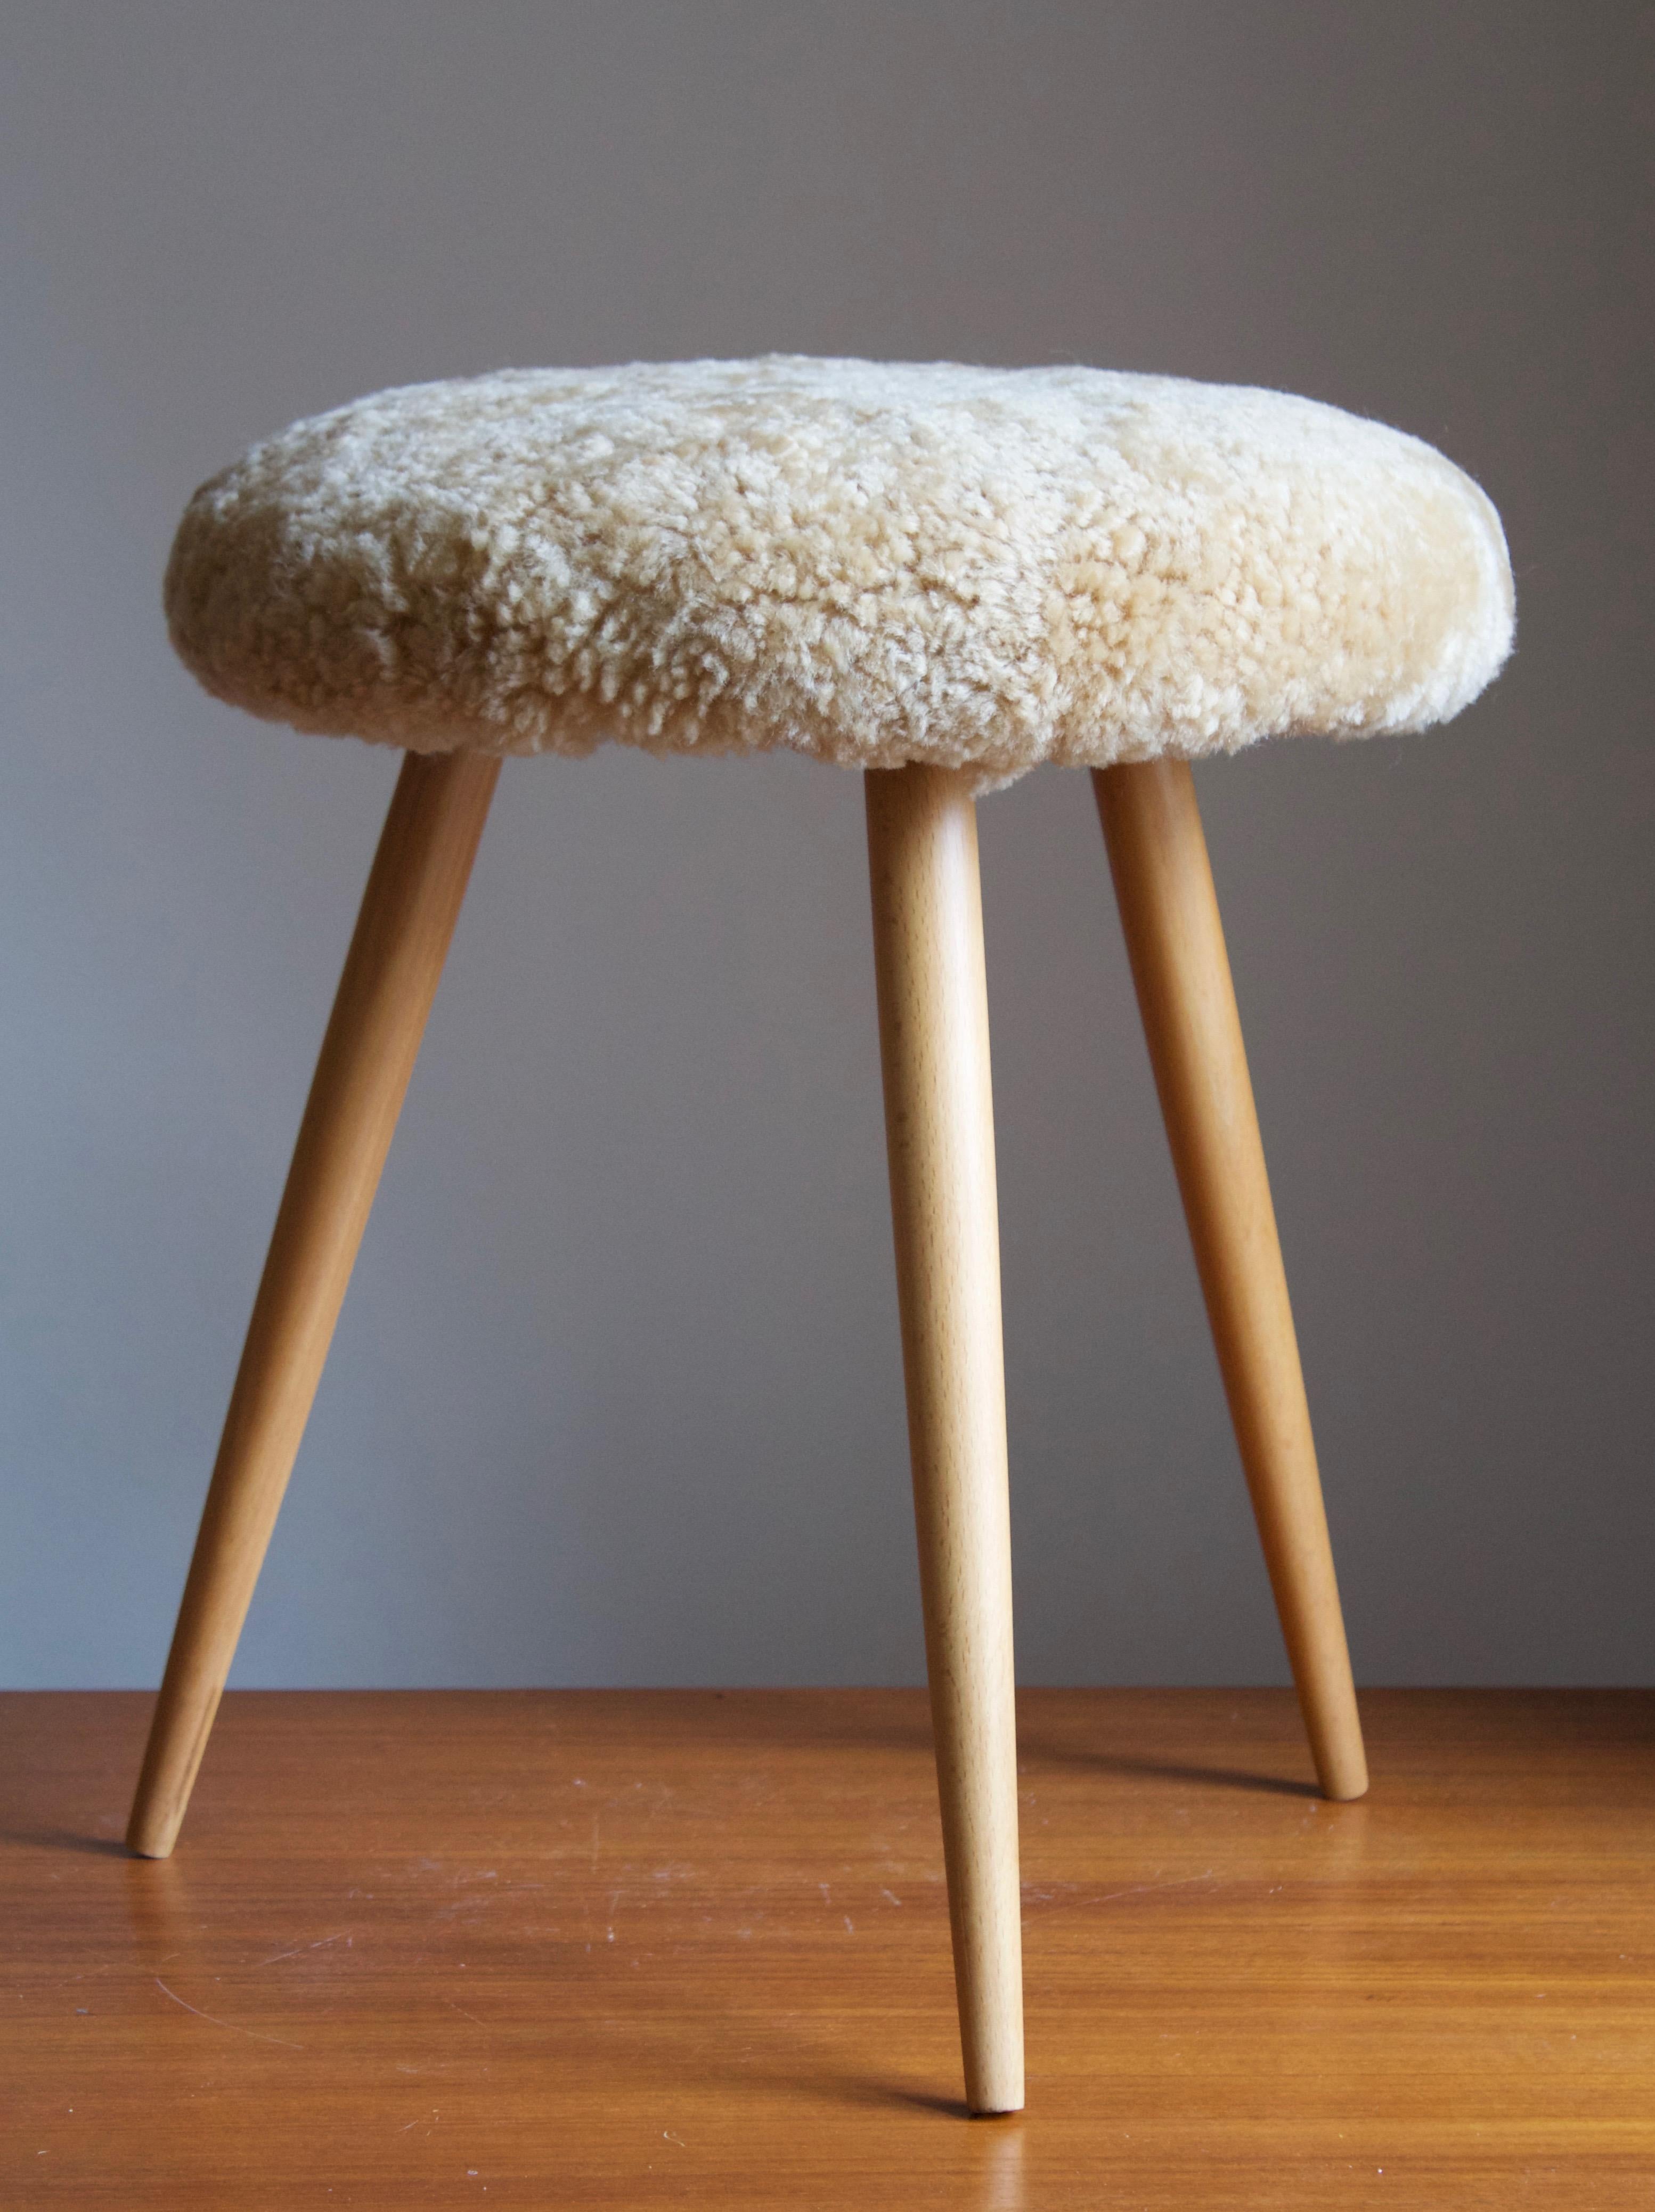 A stool in wood, overstuffed seat reupholstered in brand new sheepskin upholstery. With production label.

Other designers of the period include Finn Juhl, Hans Wegner, Isamu Noguchi, Charlotte Perriand.